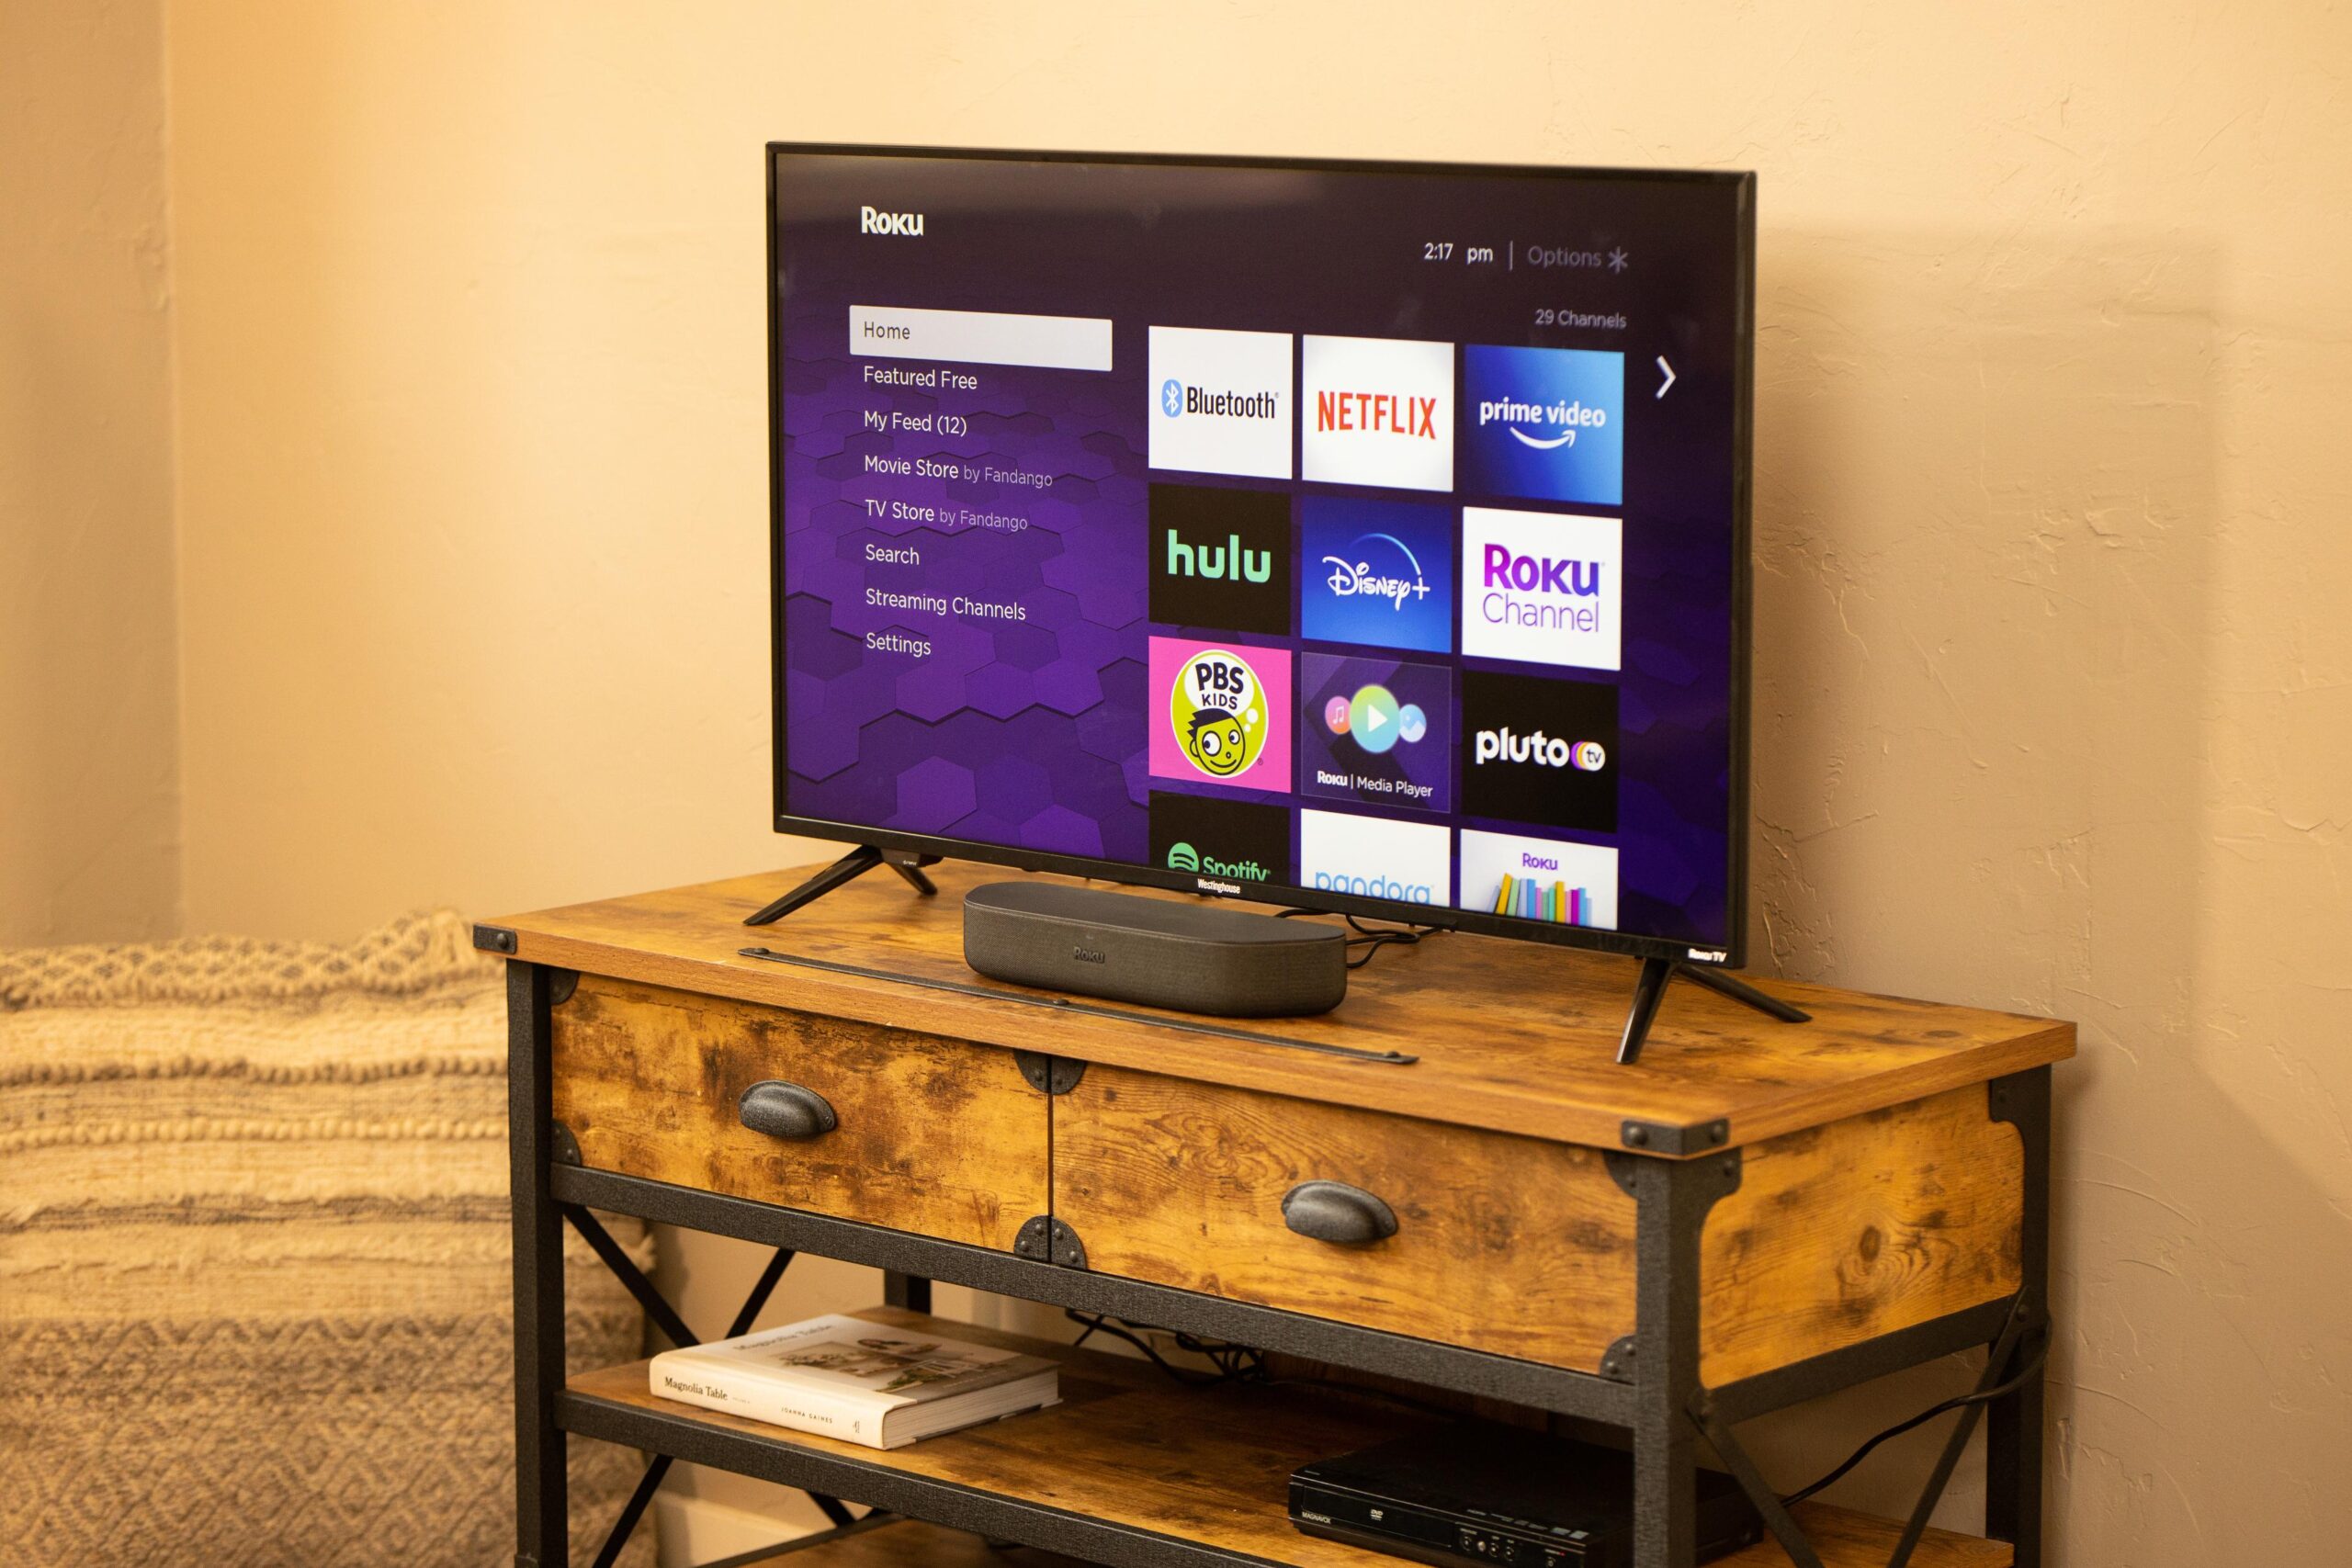 Is it possible to connect Bluetooth speakers to Roku TV?